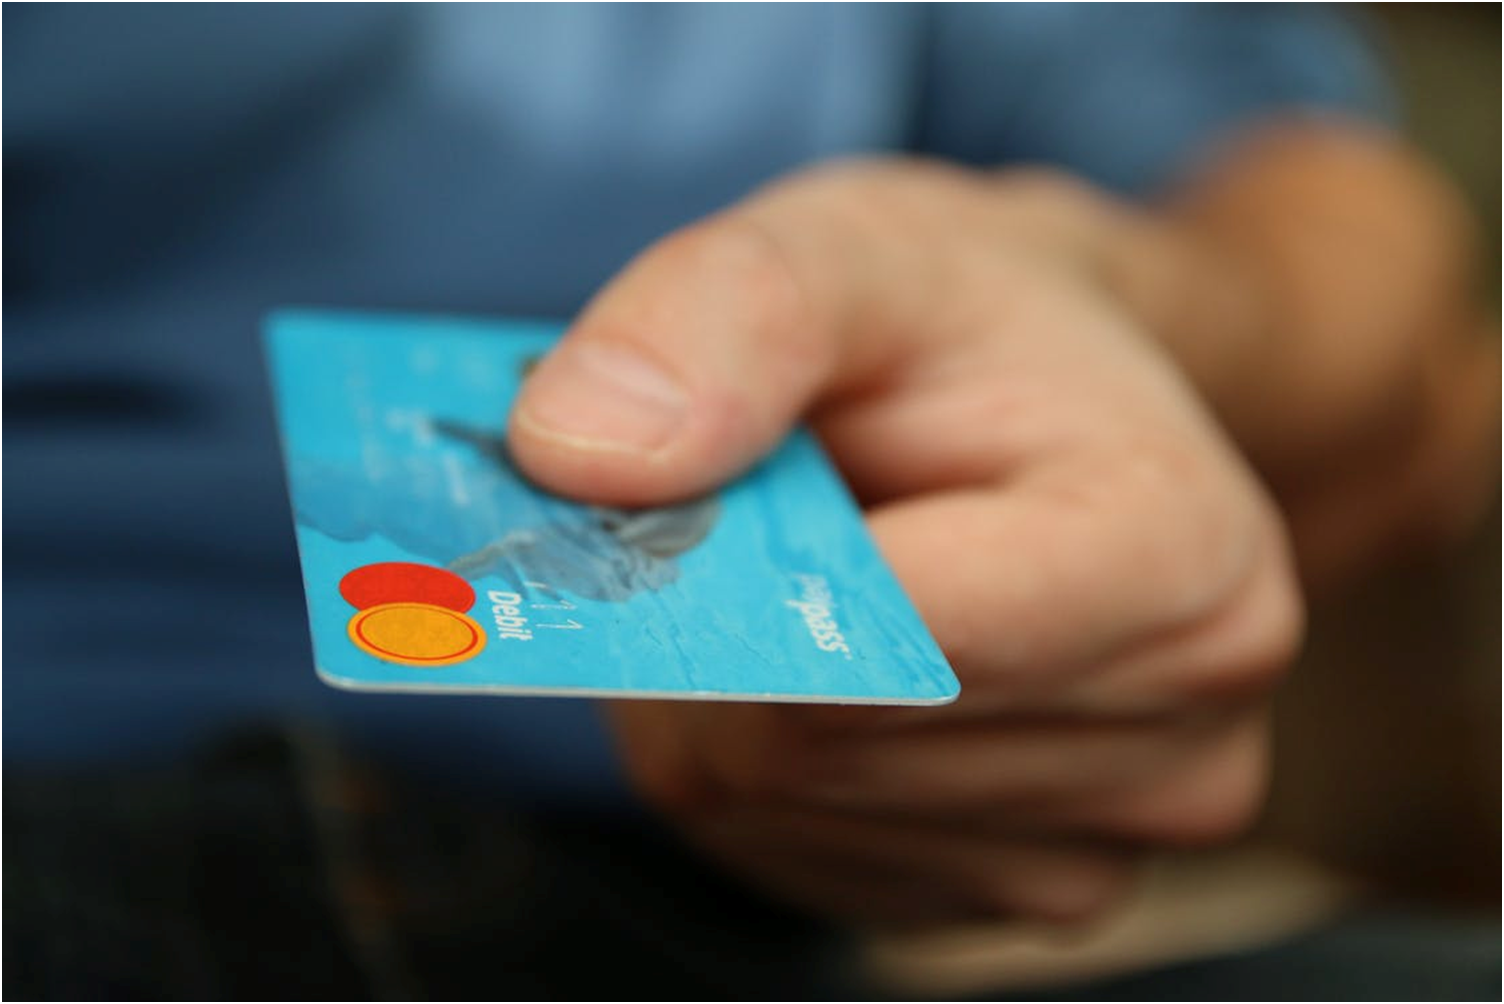 2020: A great year for Australia's payments and cards market